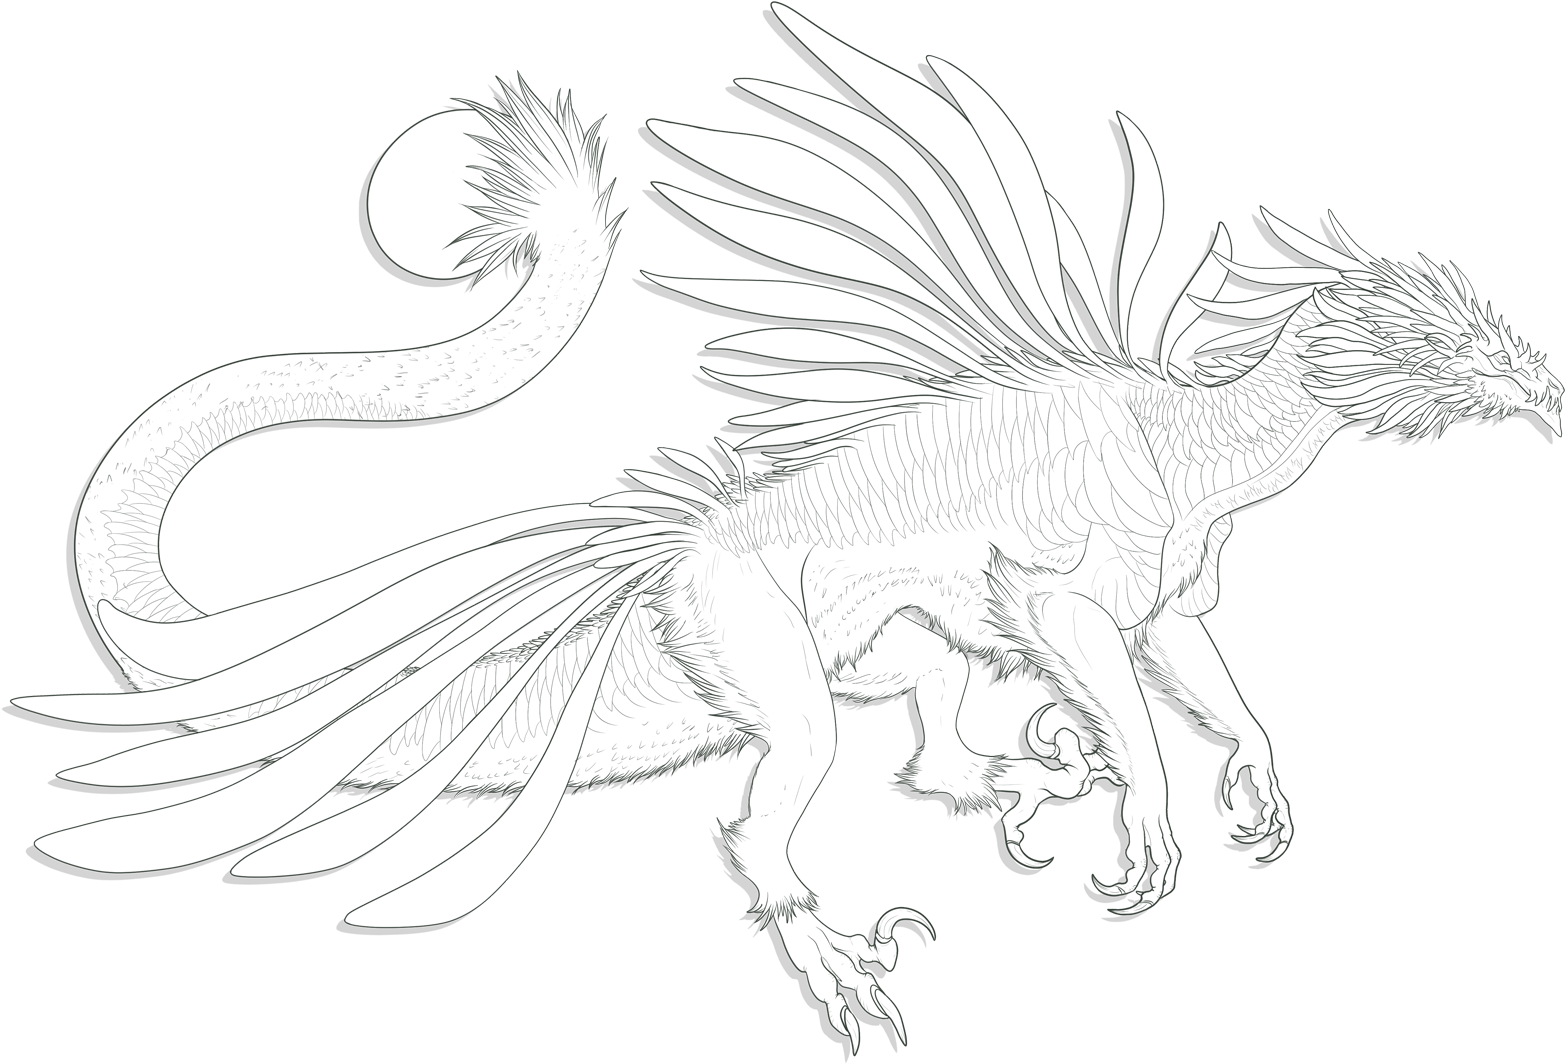 A White Dragon With Wings And Tail